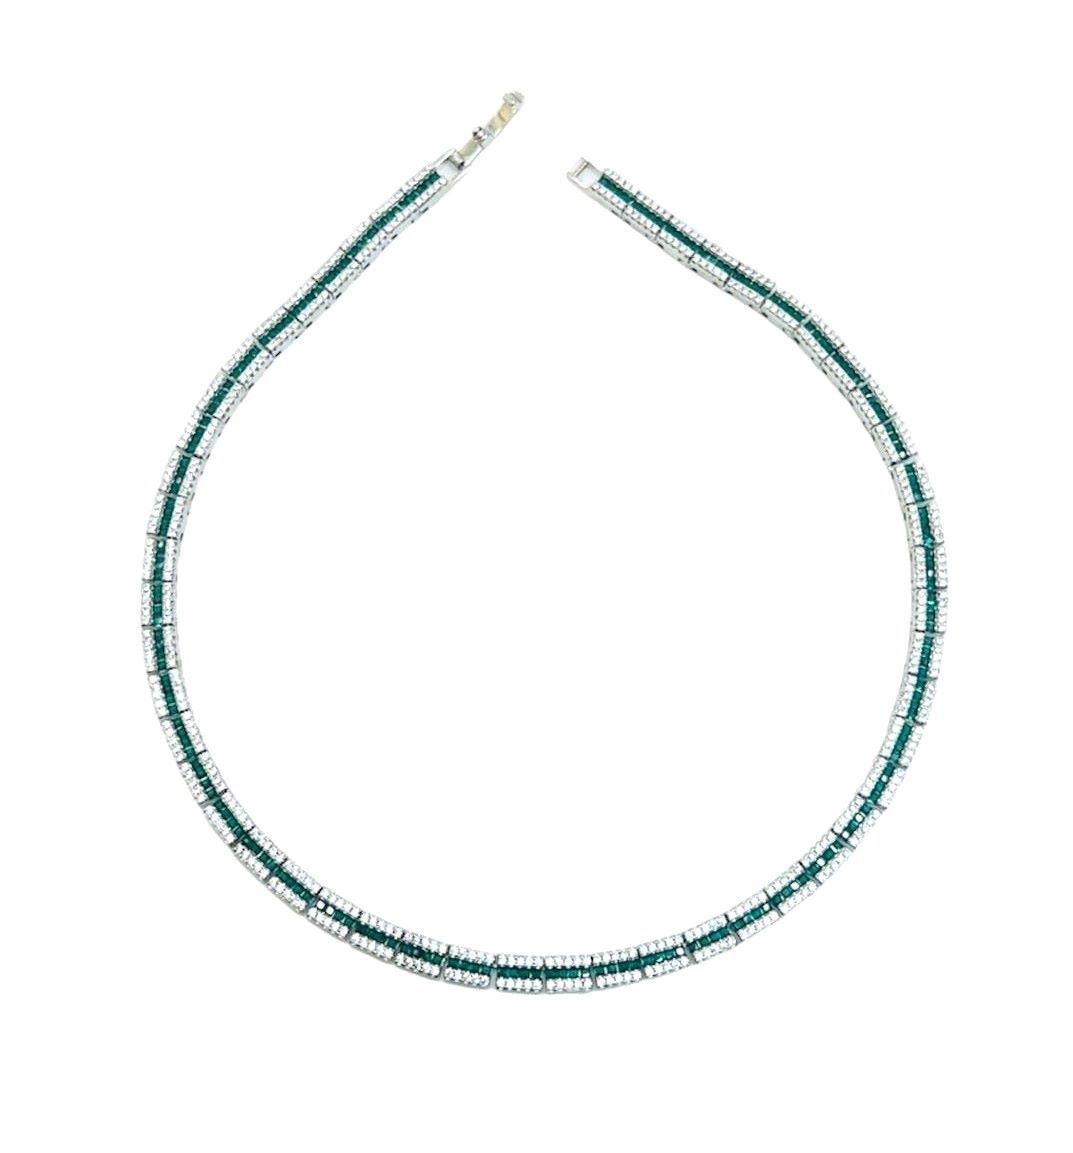 BAR LINES GREEN TENNIS 35CM NECKLACE SILVER